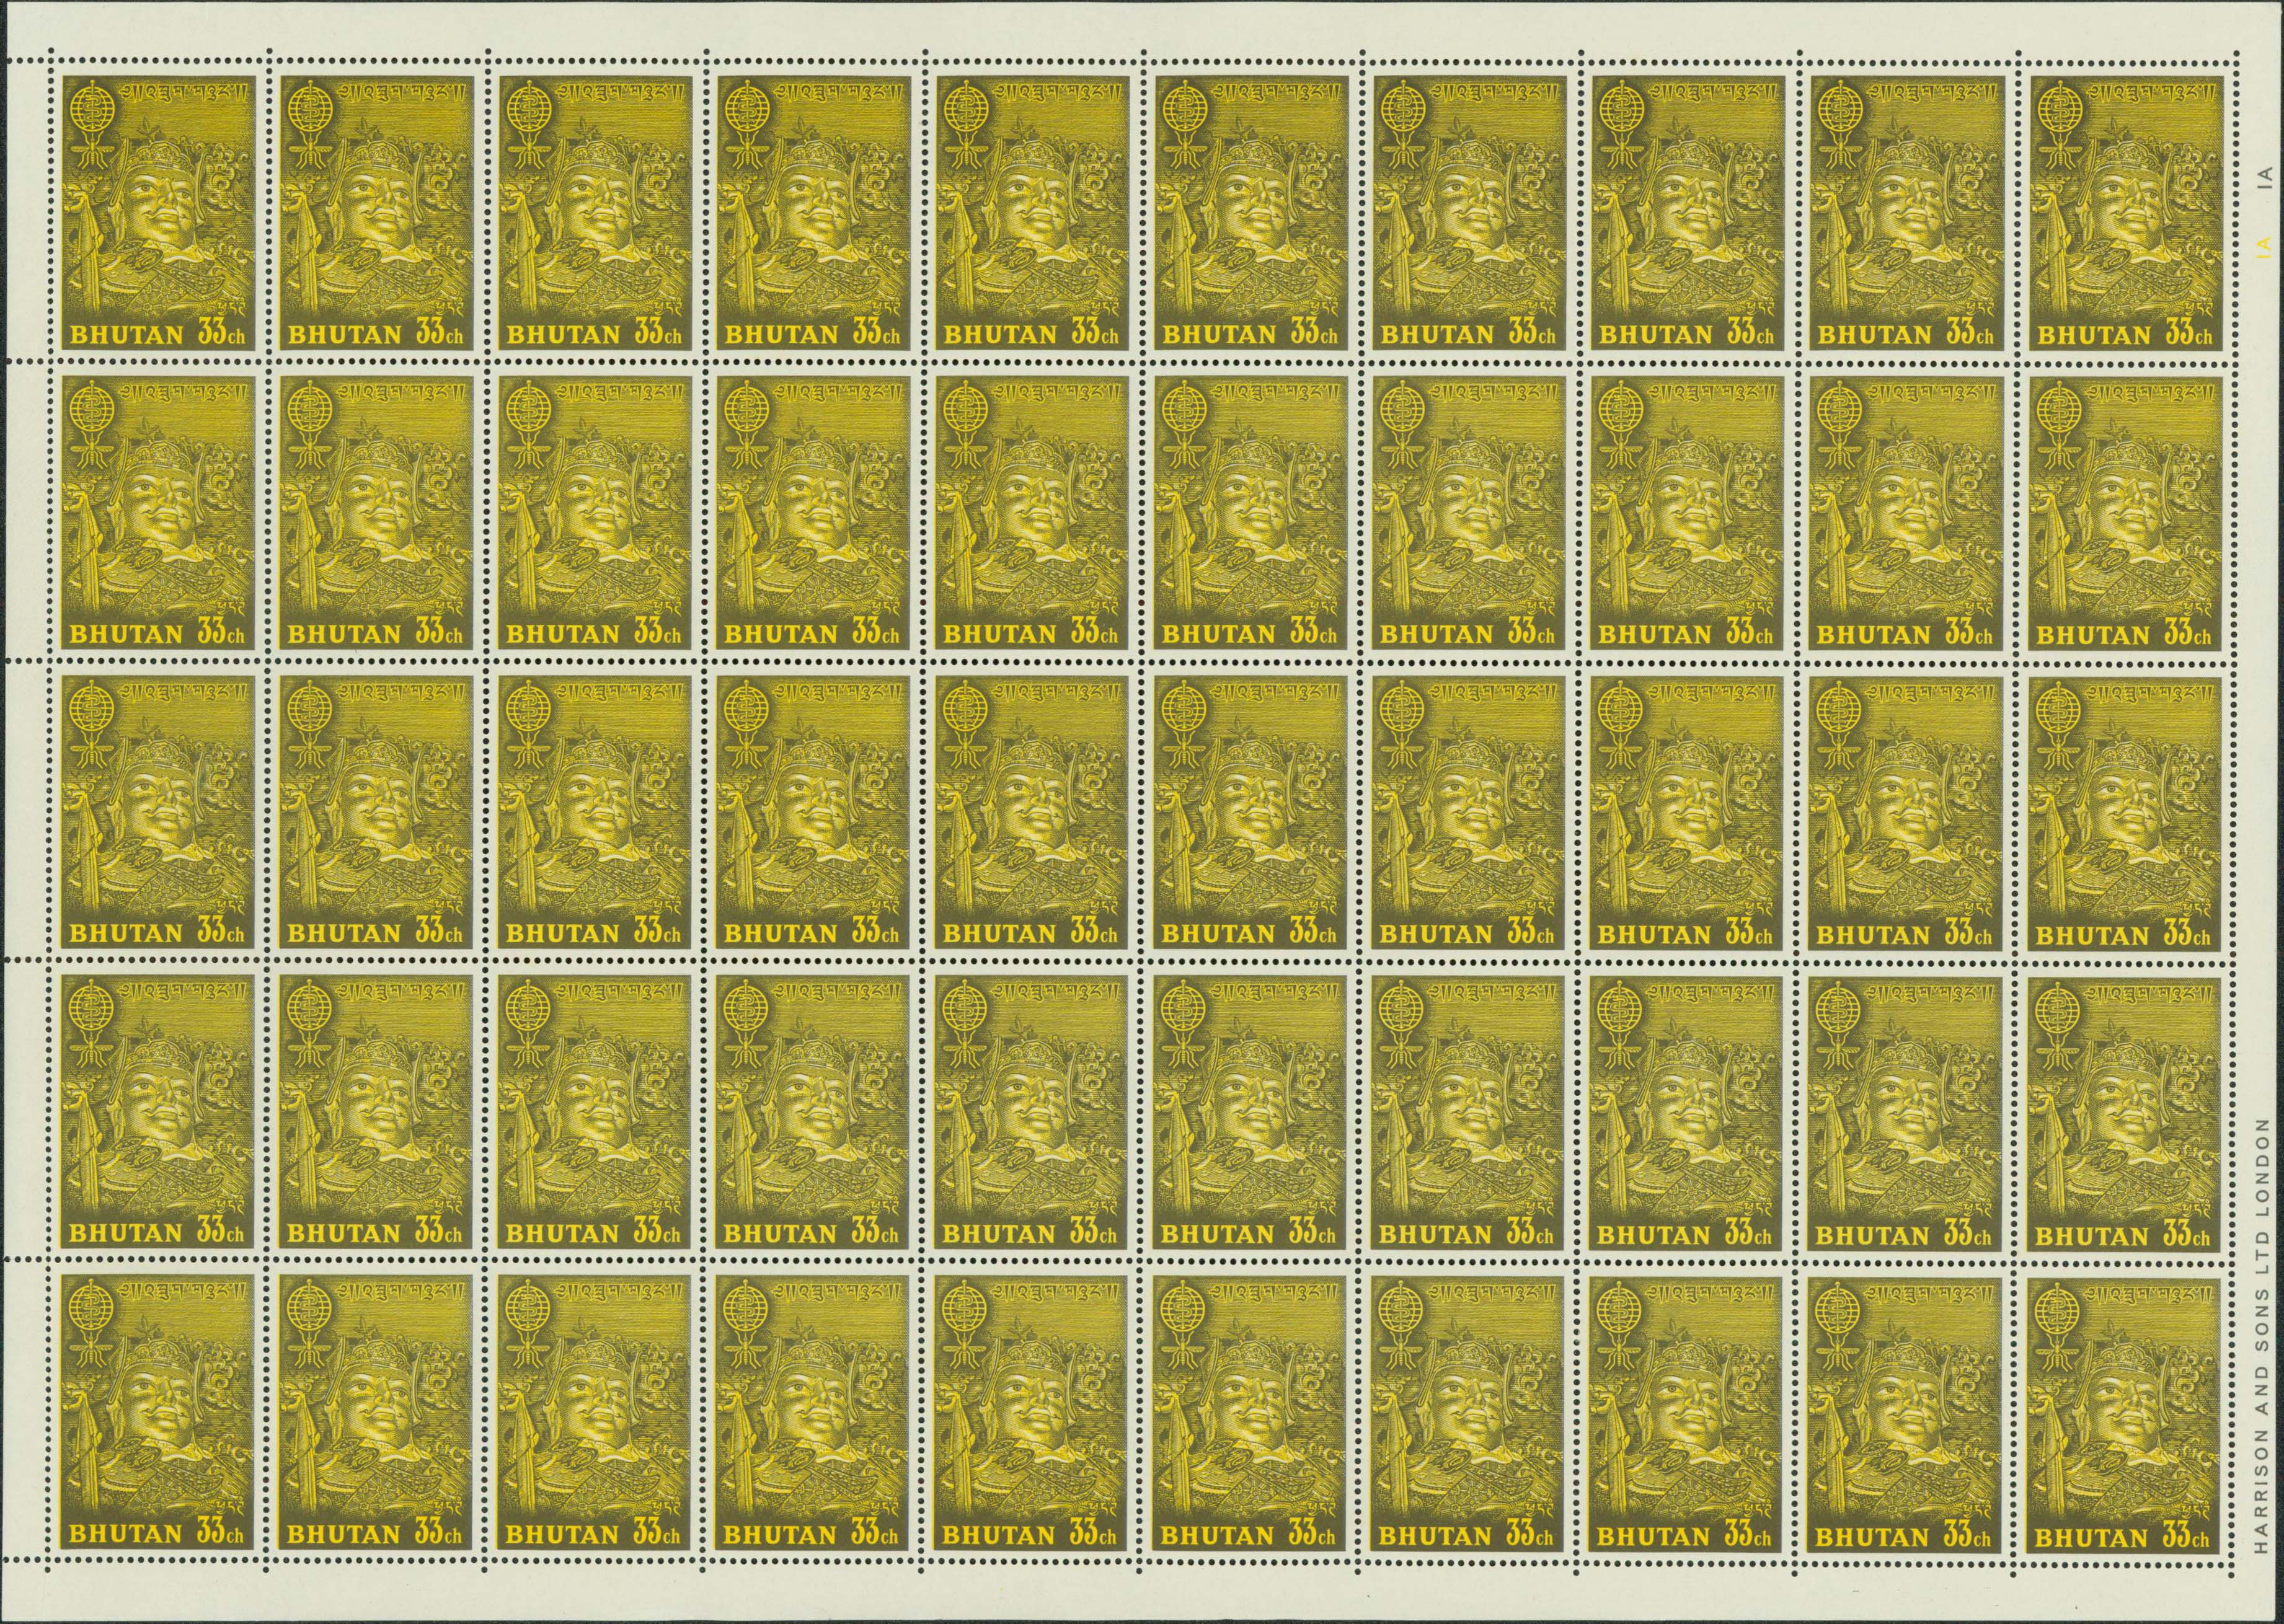 1962 Unissued Anti-Malaria 33ch Guru Rinpoche sheet in the planned colors